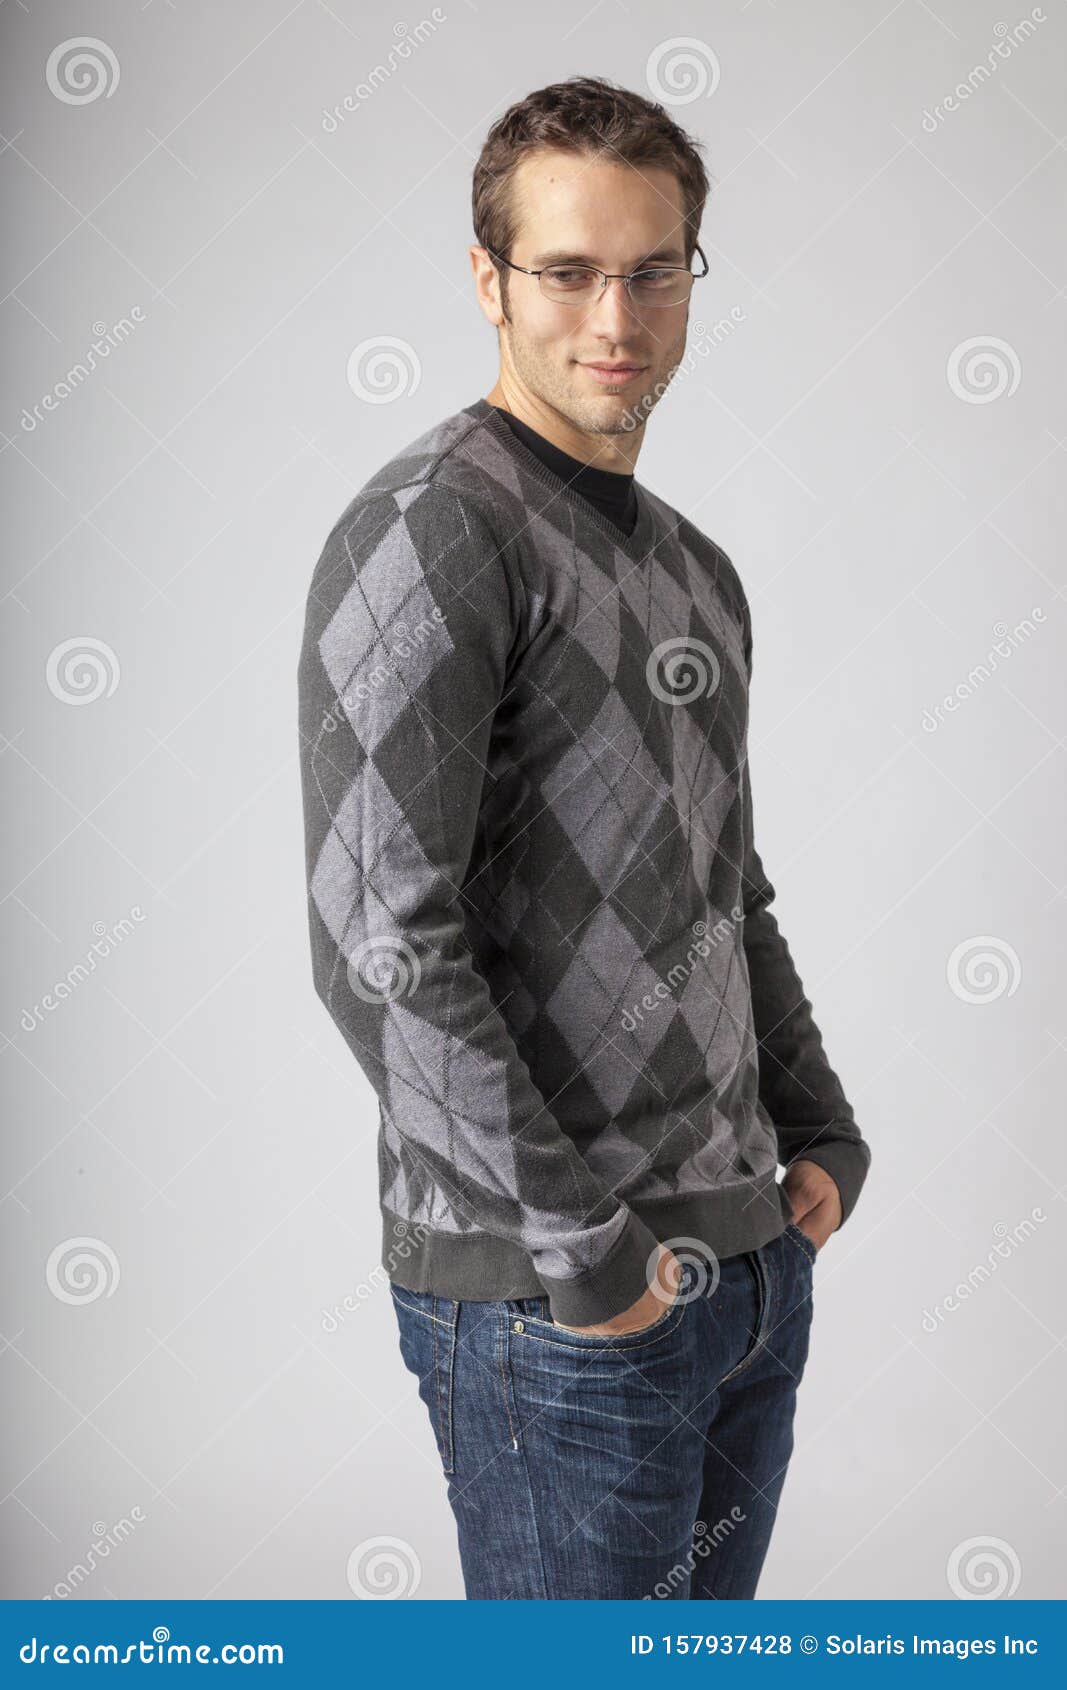 man wearing argyle sweater, jeans and eyeglasses. young men`s casual fall fashions clothing apparel styles.